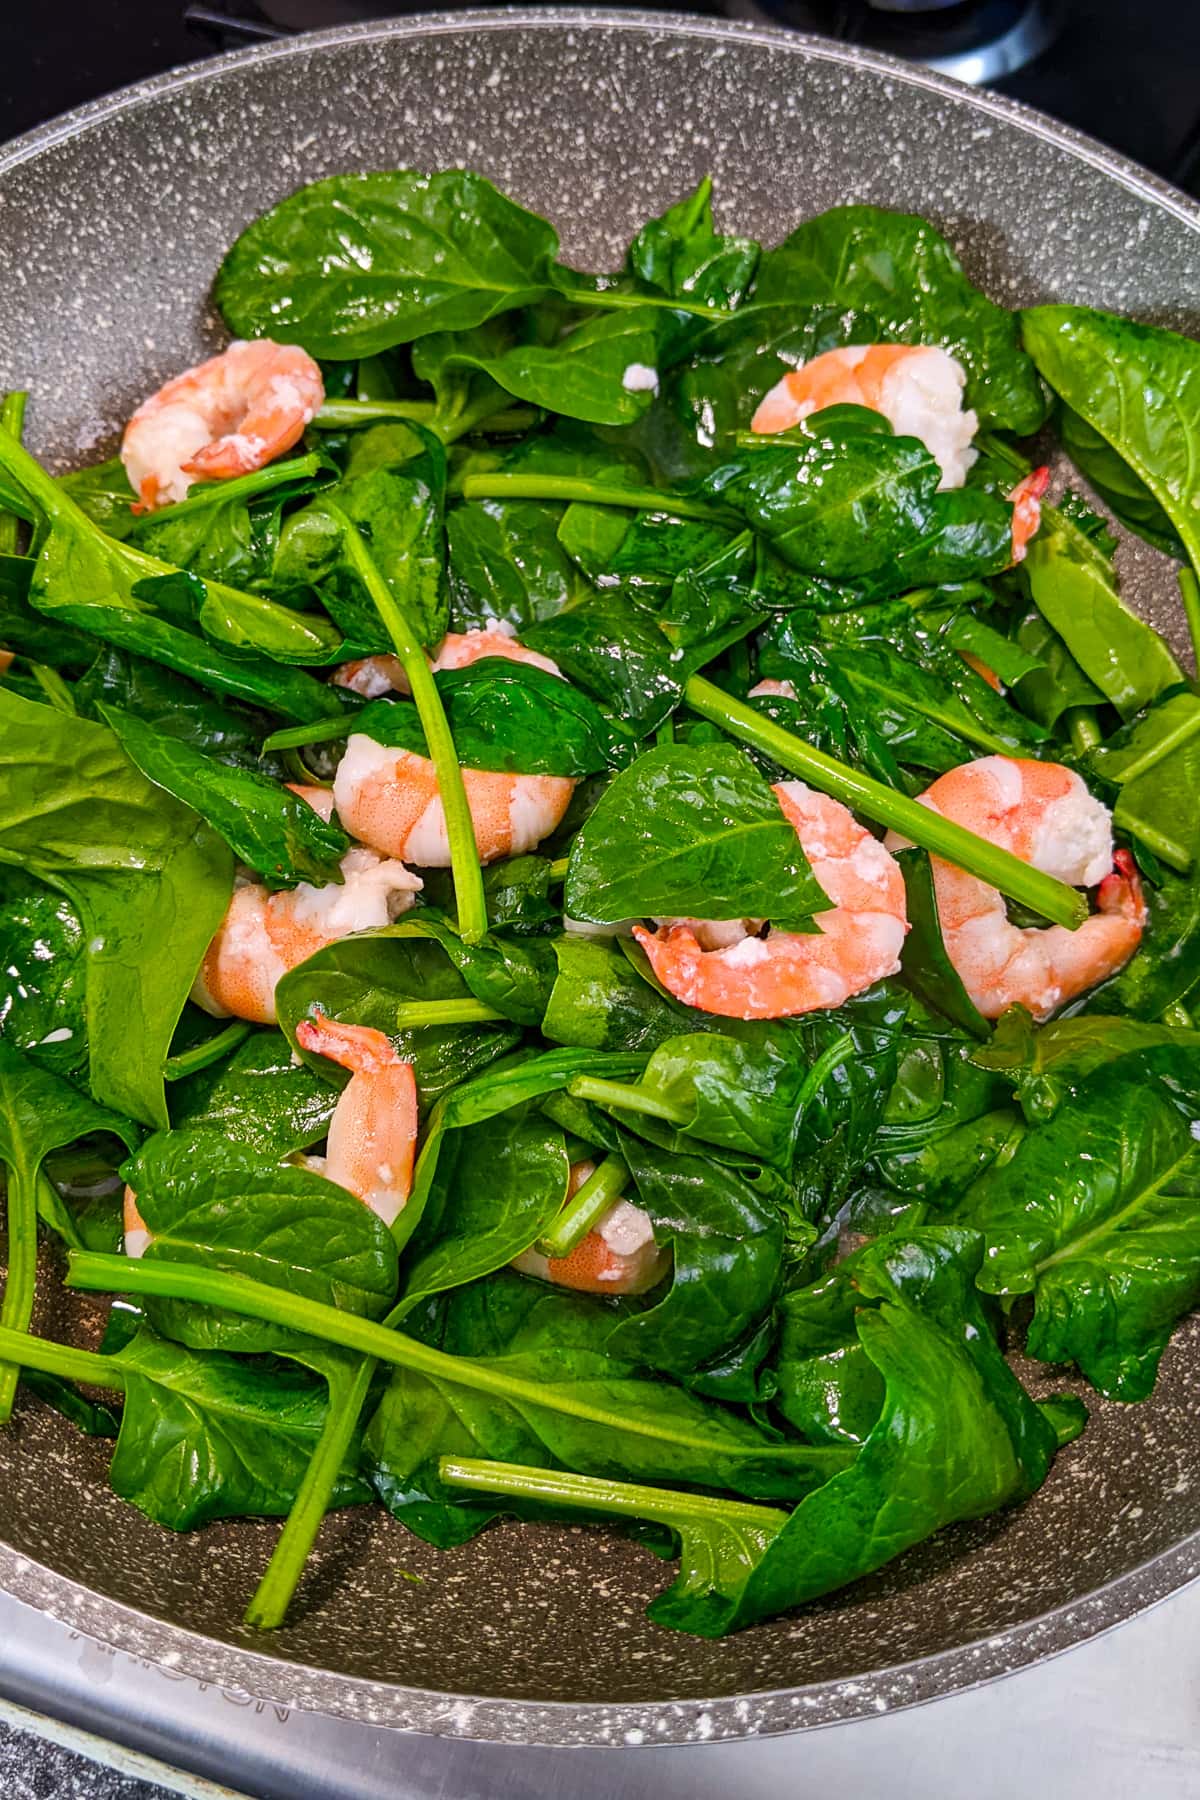 Spinach leaves with fried prawns in a frying pan.